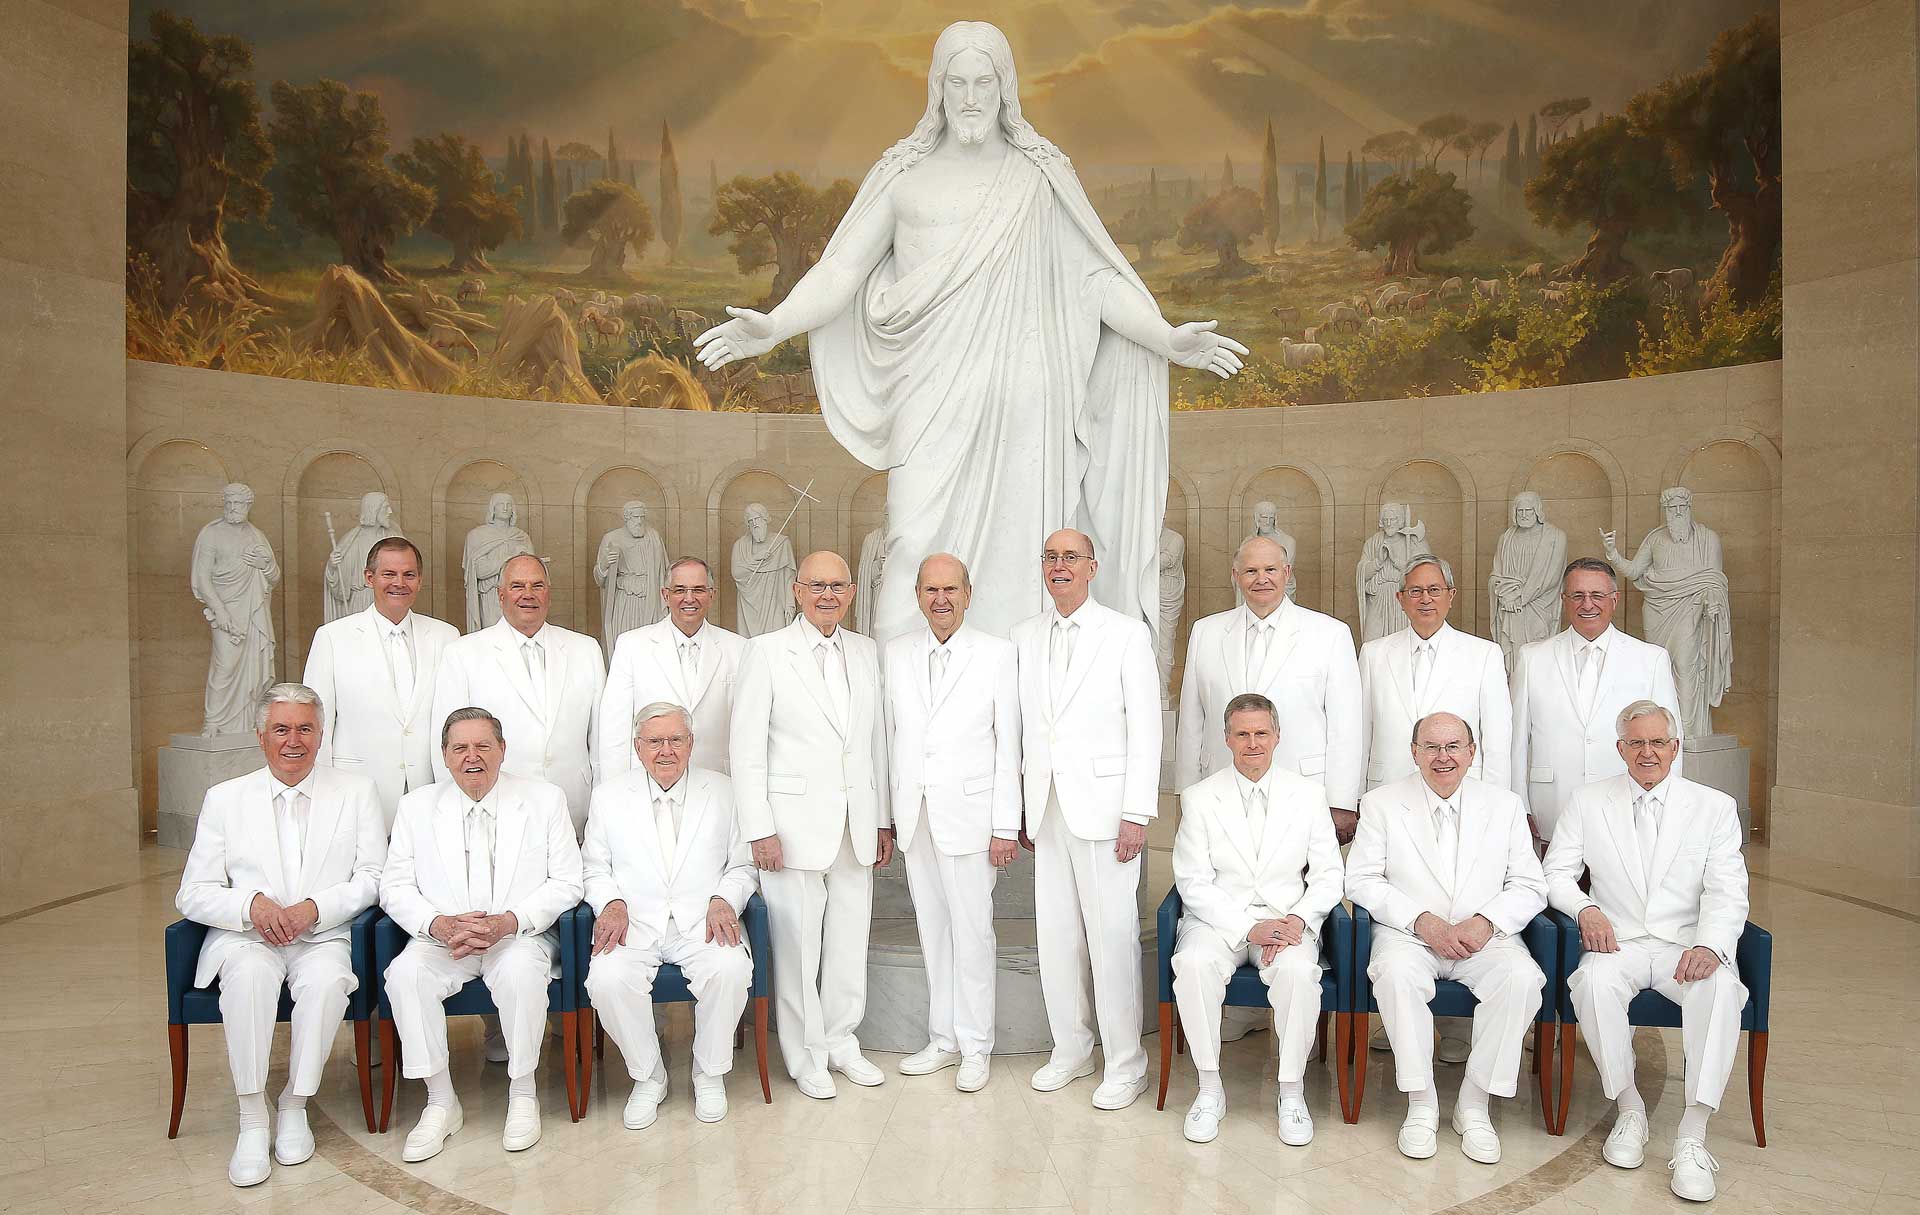 The Twelve Apostles and First Presidency of the Church of Jesus Christ of Latter-day Saints at the Rome, Italy Temple Visitor Center. Image via Church of Jesus Christ.